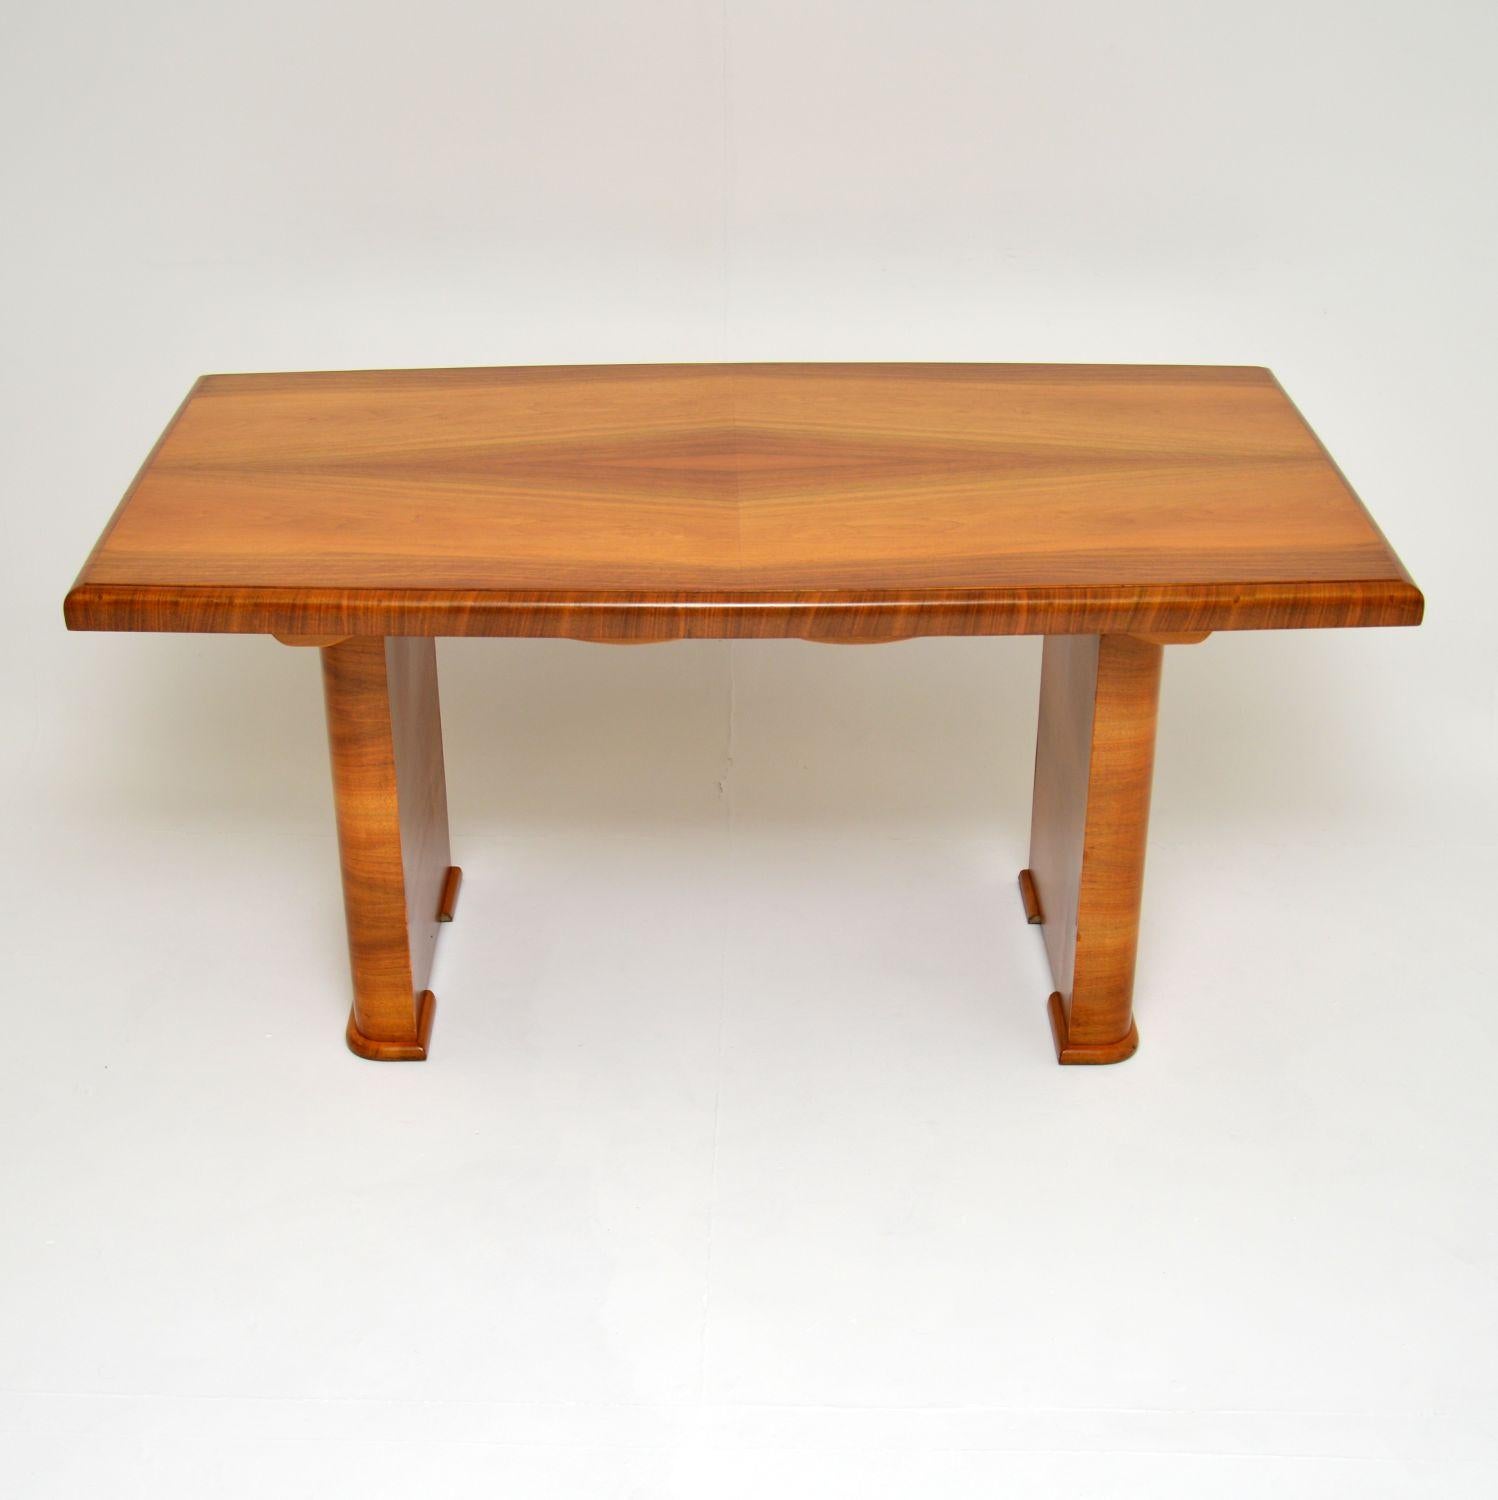 A wonderful original Art Deco period dining table in walnut. This was made in England, it dates from the 1930’s.

It is of wonderful quality and is a very useful size. It would be equally useful as a dining table or a desk. The top has a lovely